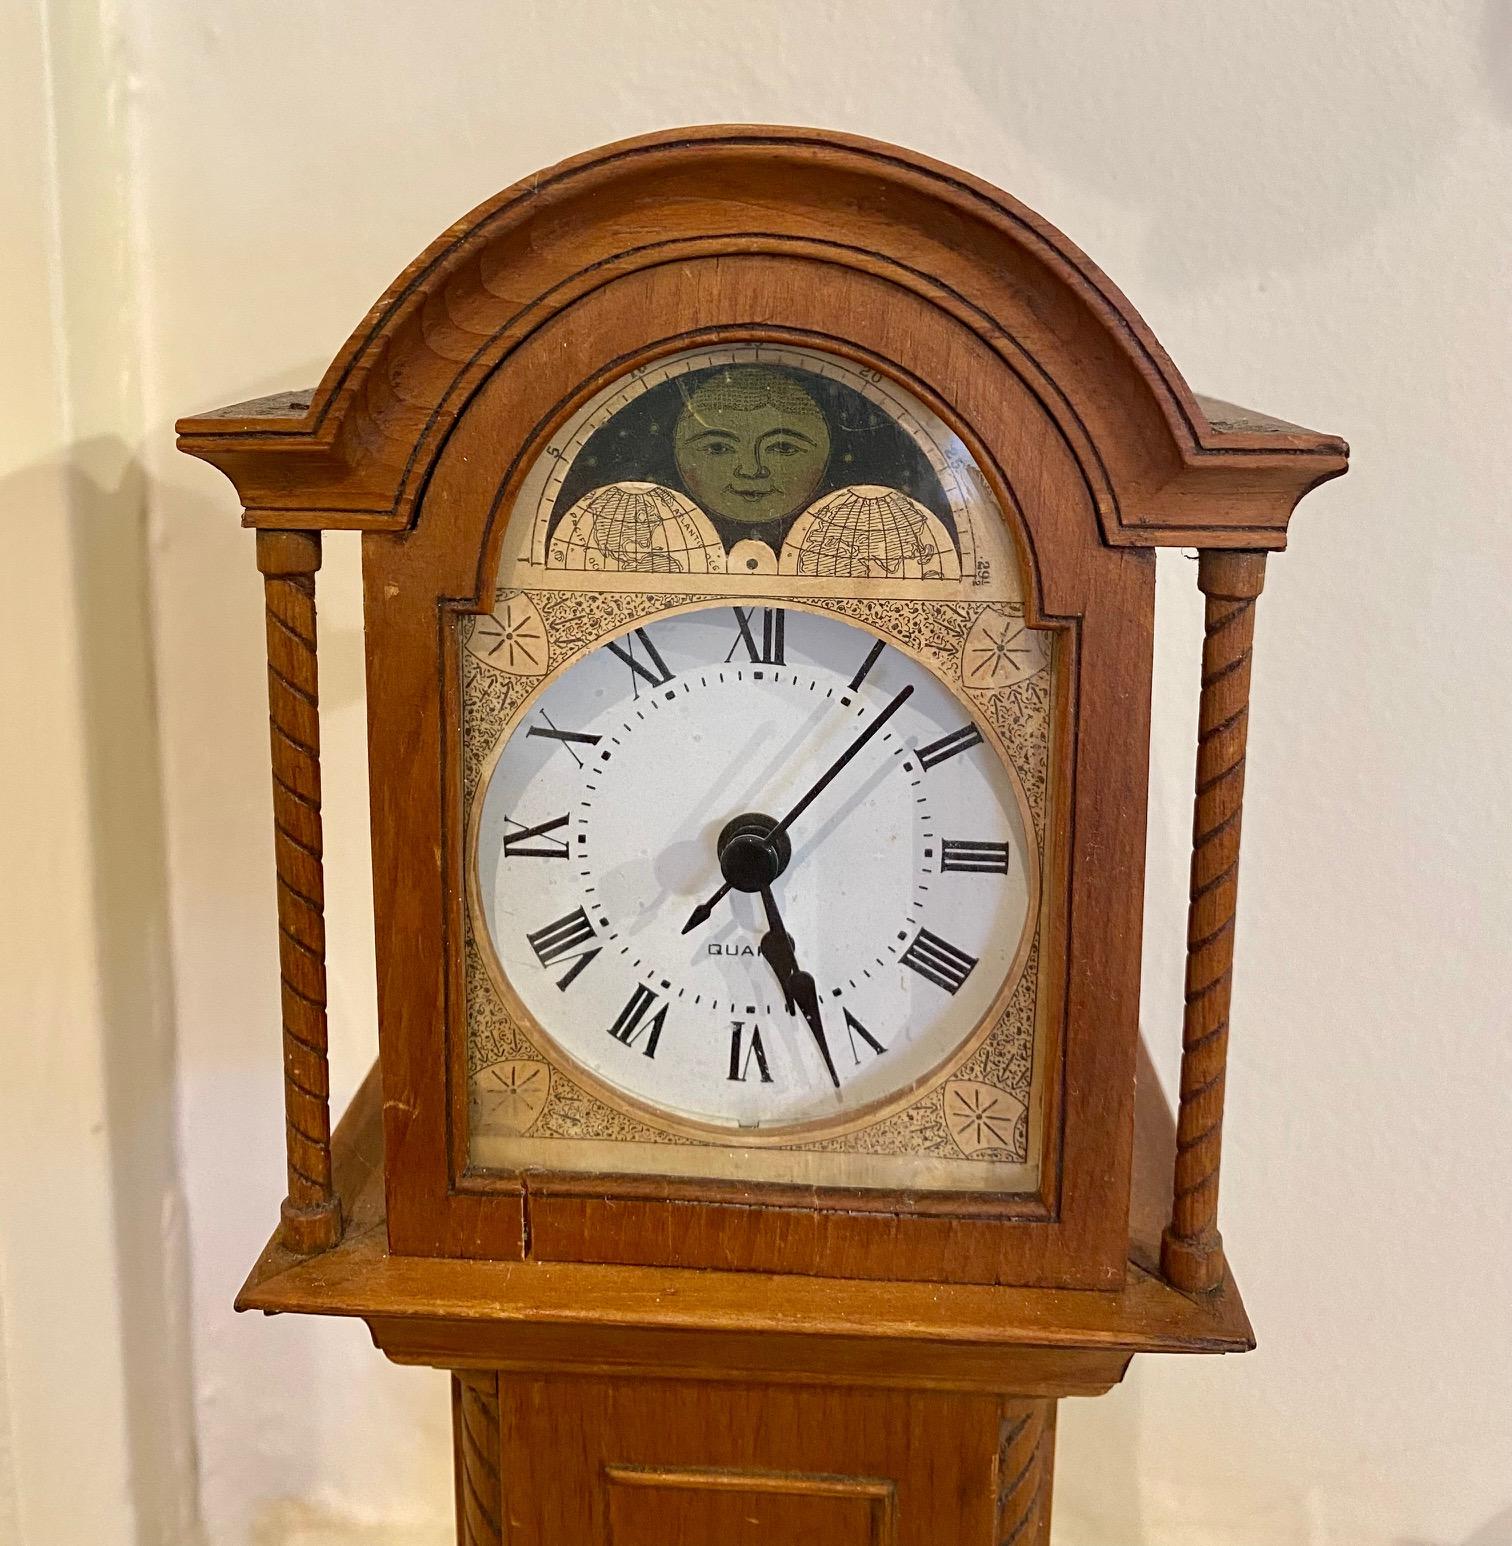 Rare Antique Nantucket miniature long case clock, made and patented by Wallace Brown, circa 1894, with original paper label and poem. A Hand crafted mahogany case with arched bonnet, turned columns flanking the decorated face and dial. Found on